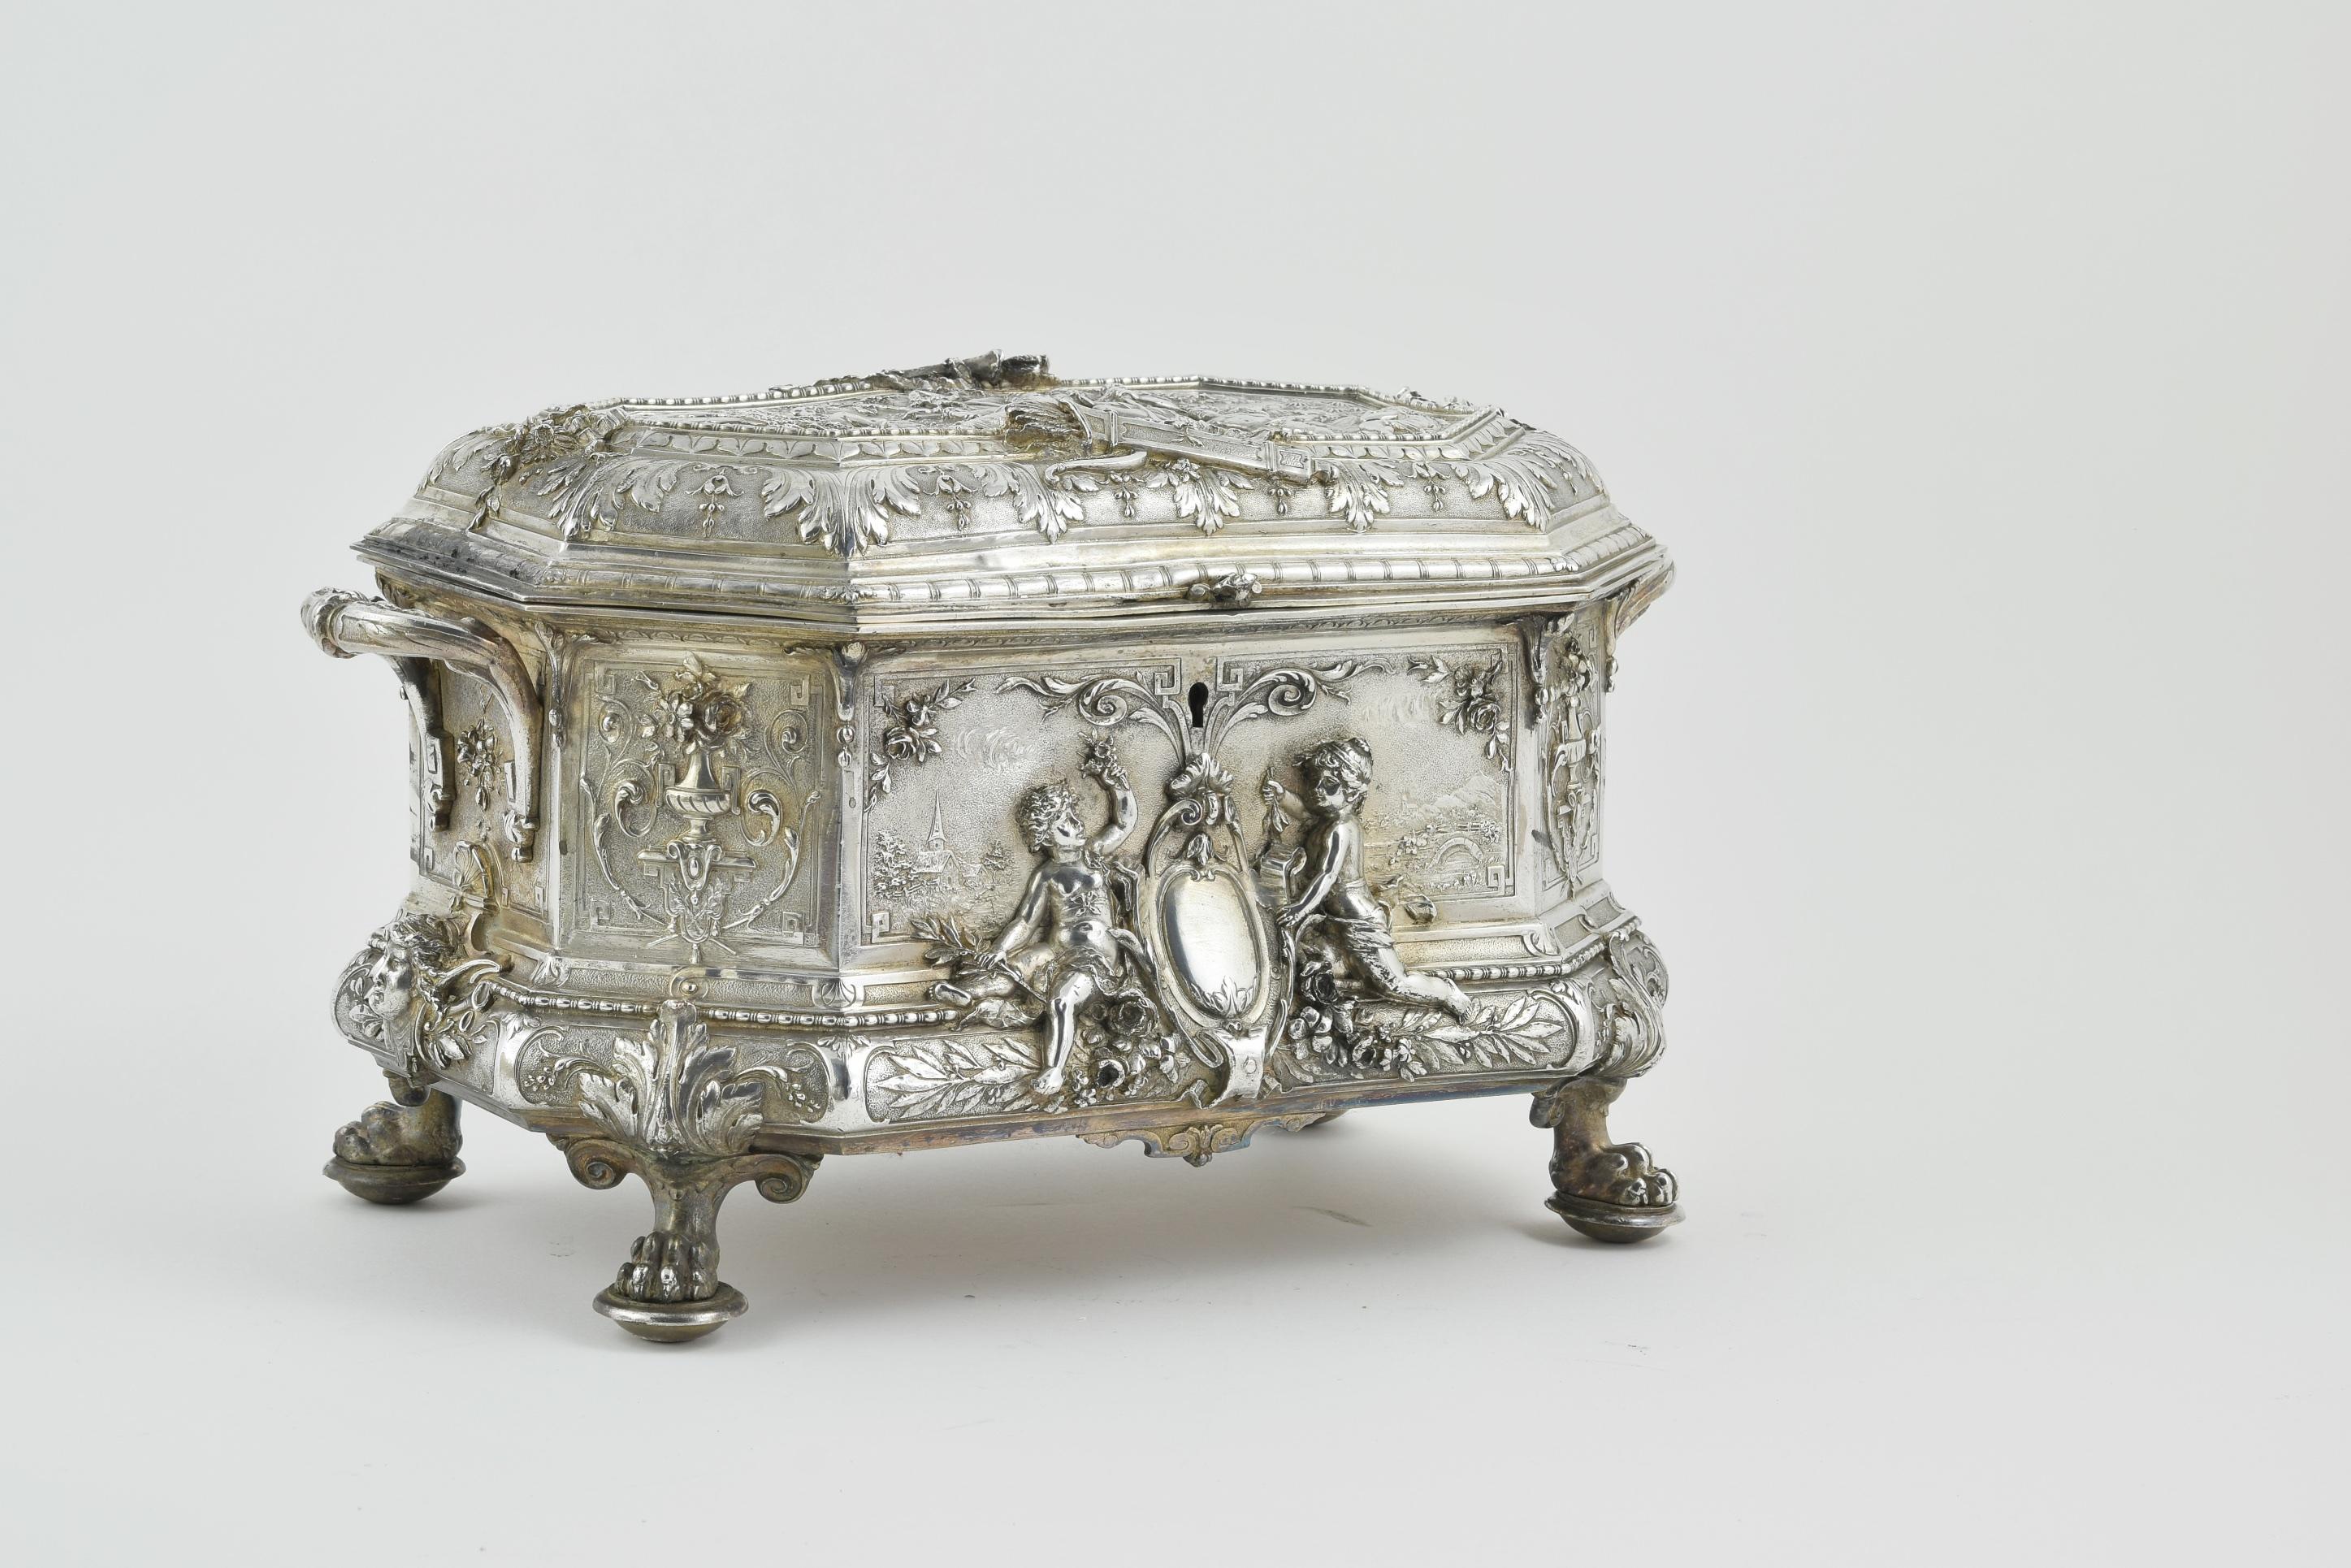 The whole casket is richly decorated. Standing on lions paw feet adorned with baroque motifs the scene on top depicts cupid stood beside two lovers (possibly) Daphne and Apollo. The front and rear of casket with empty shield flanked by cherubs.